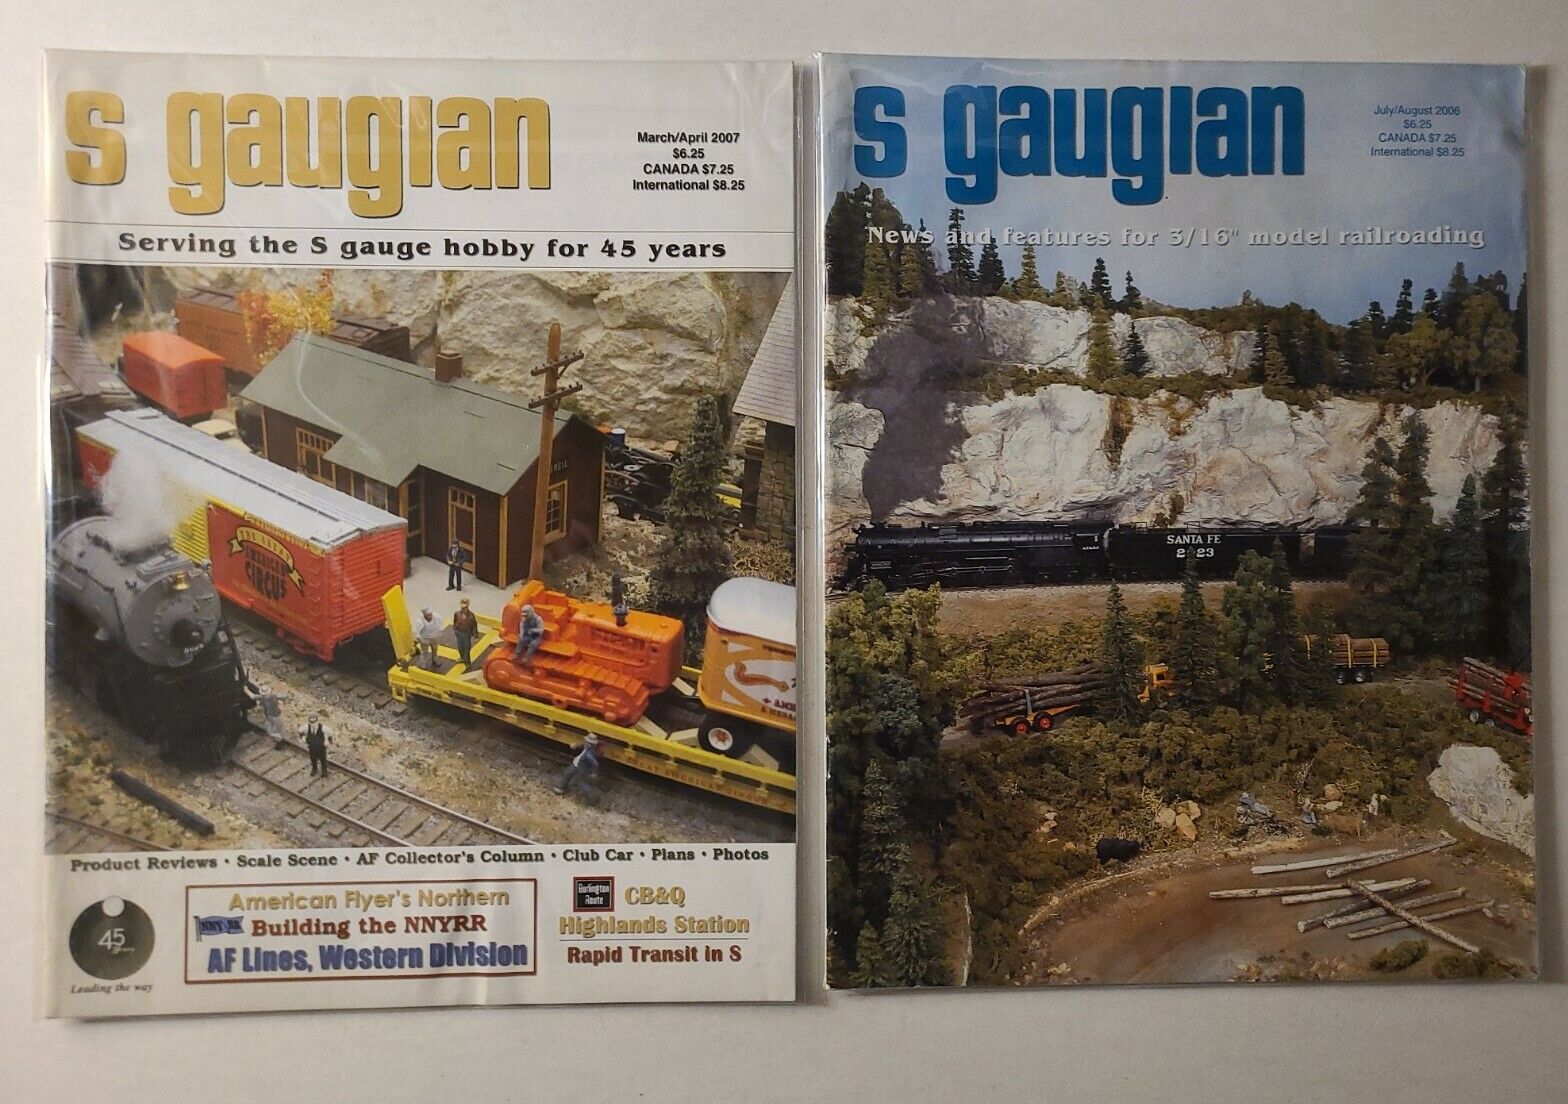 2 Issues of S Gaugian Magazine - July/August 2006 & March/April 2007